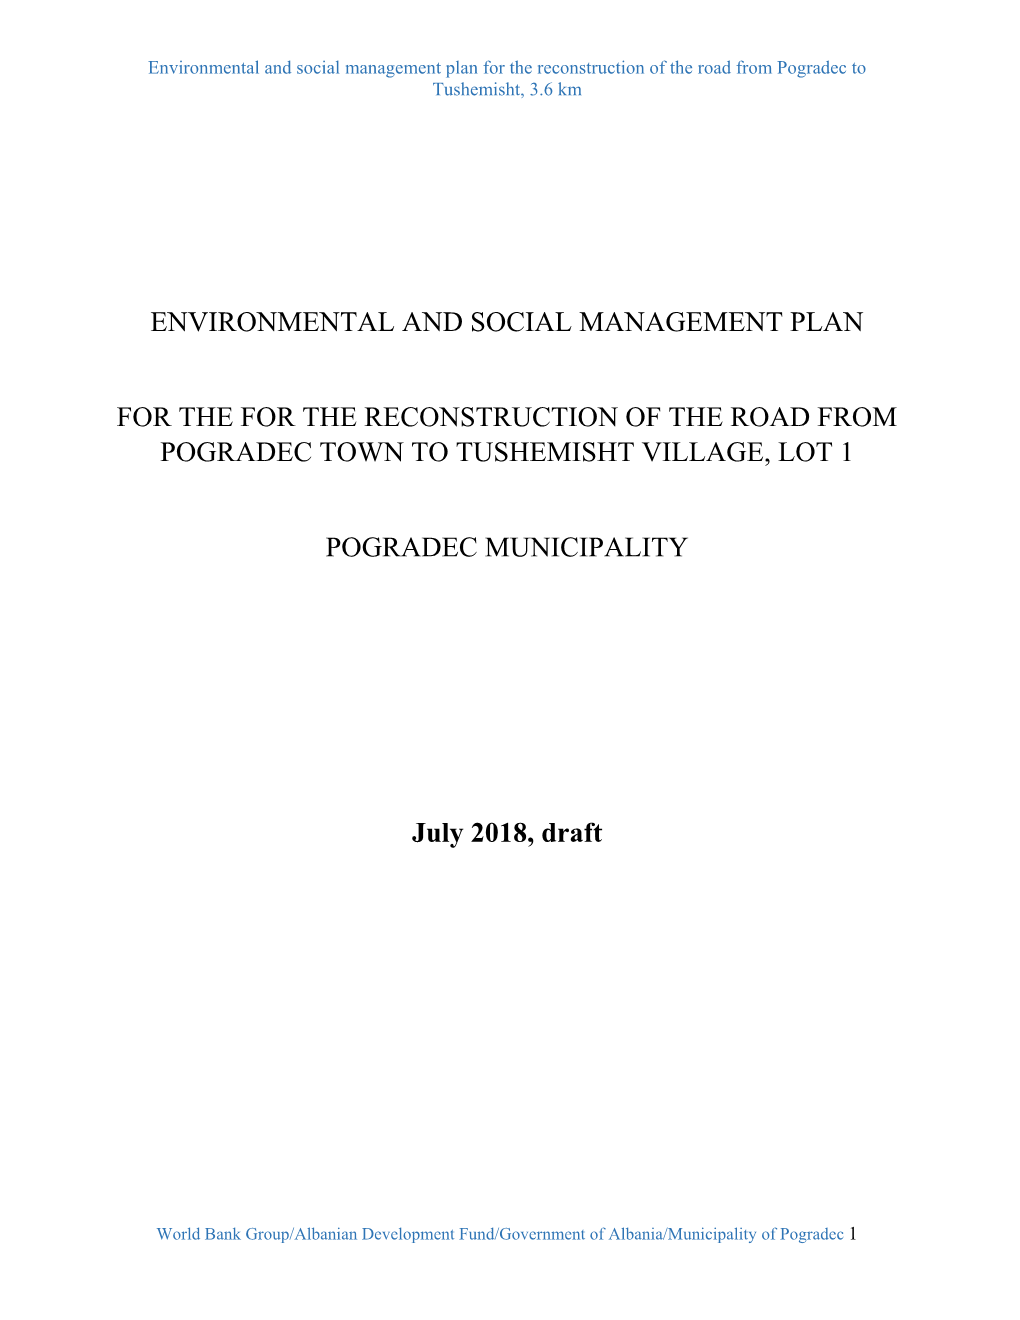 Environmental and Social Management Plan for the for The